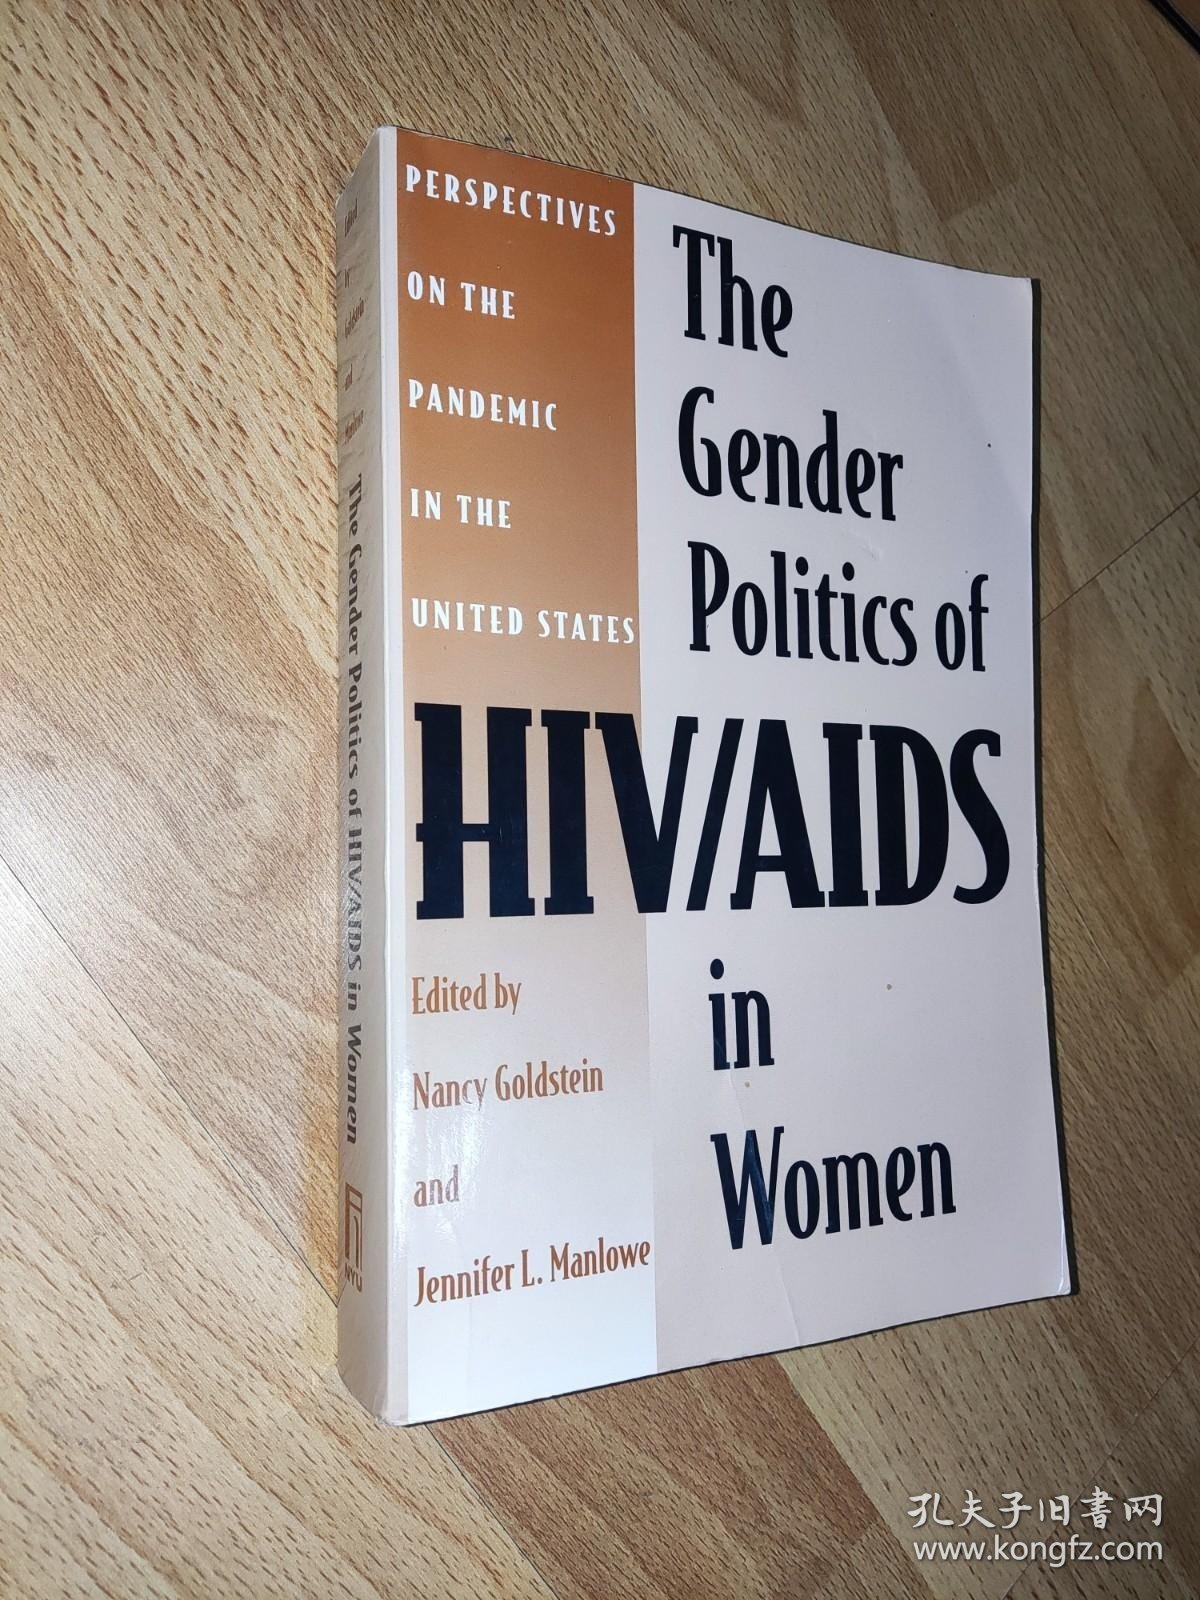 The Gender Politics of HIV/AIDS in Women: Perspectives on the Pandemic in the United States 英文版